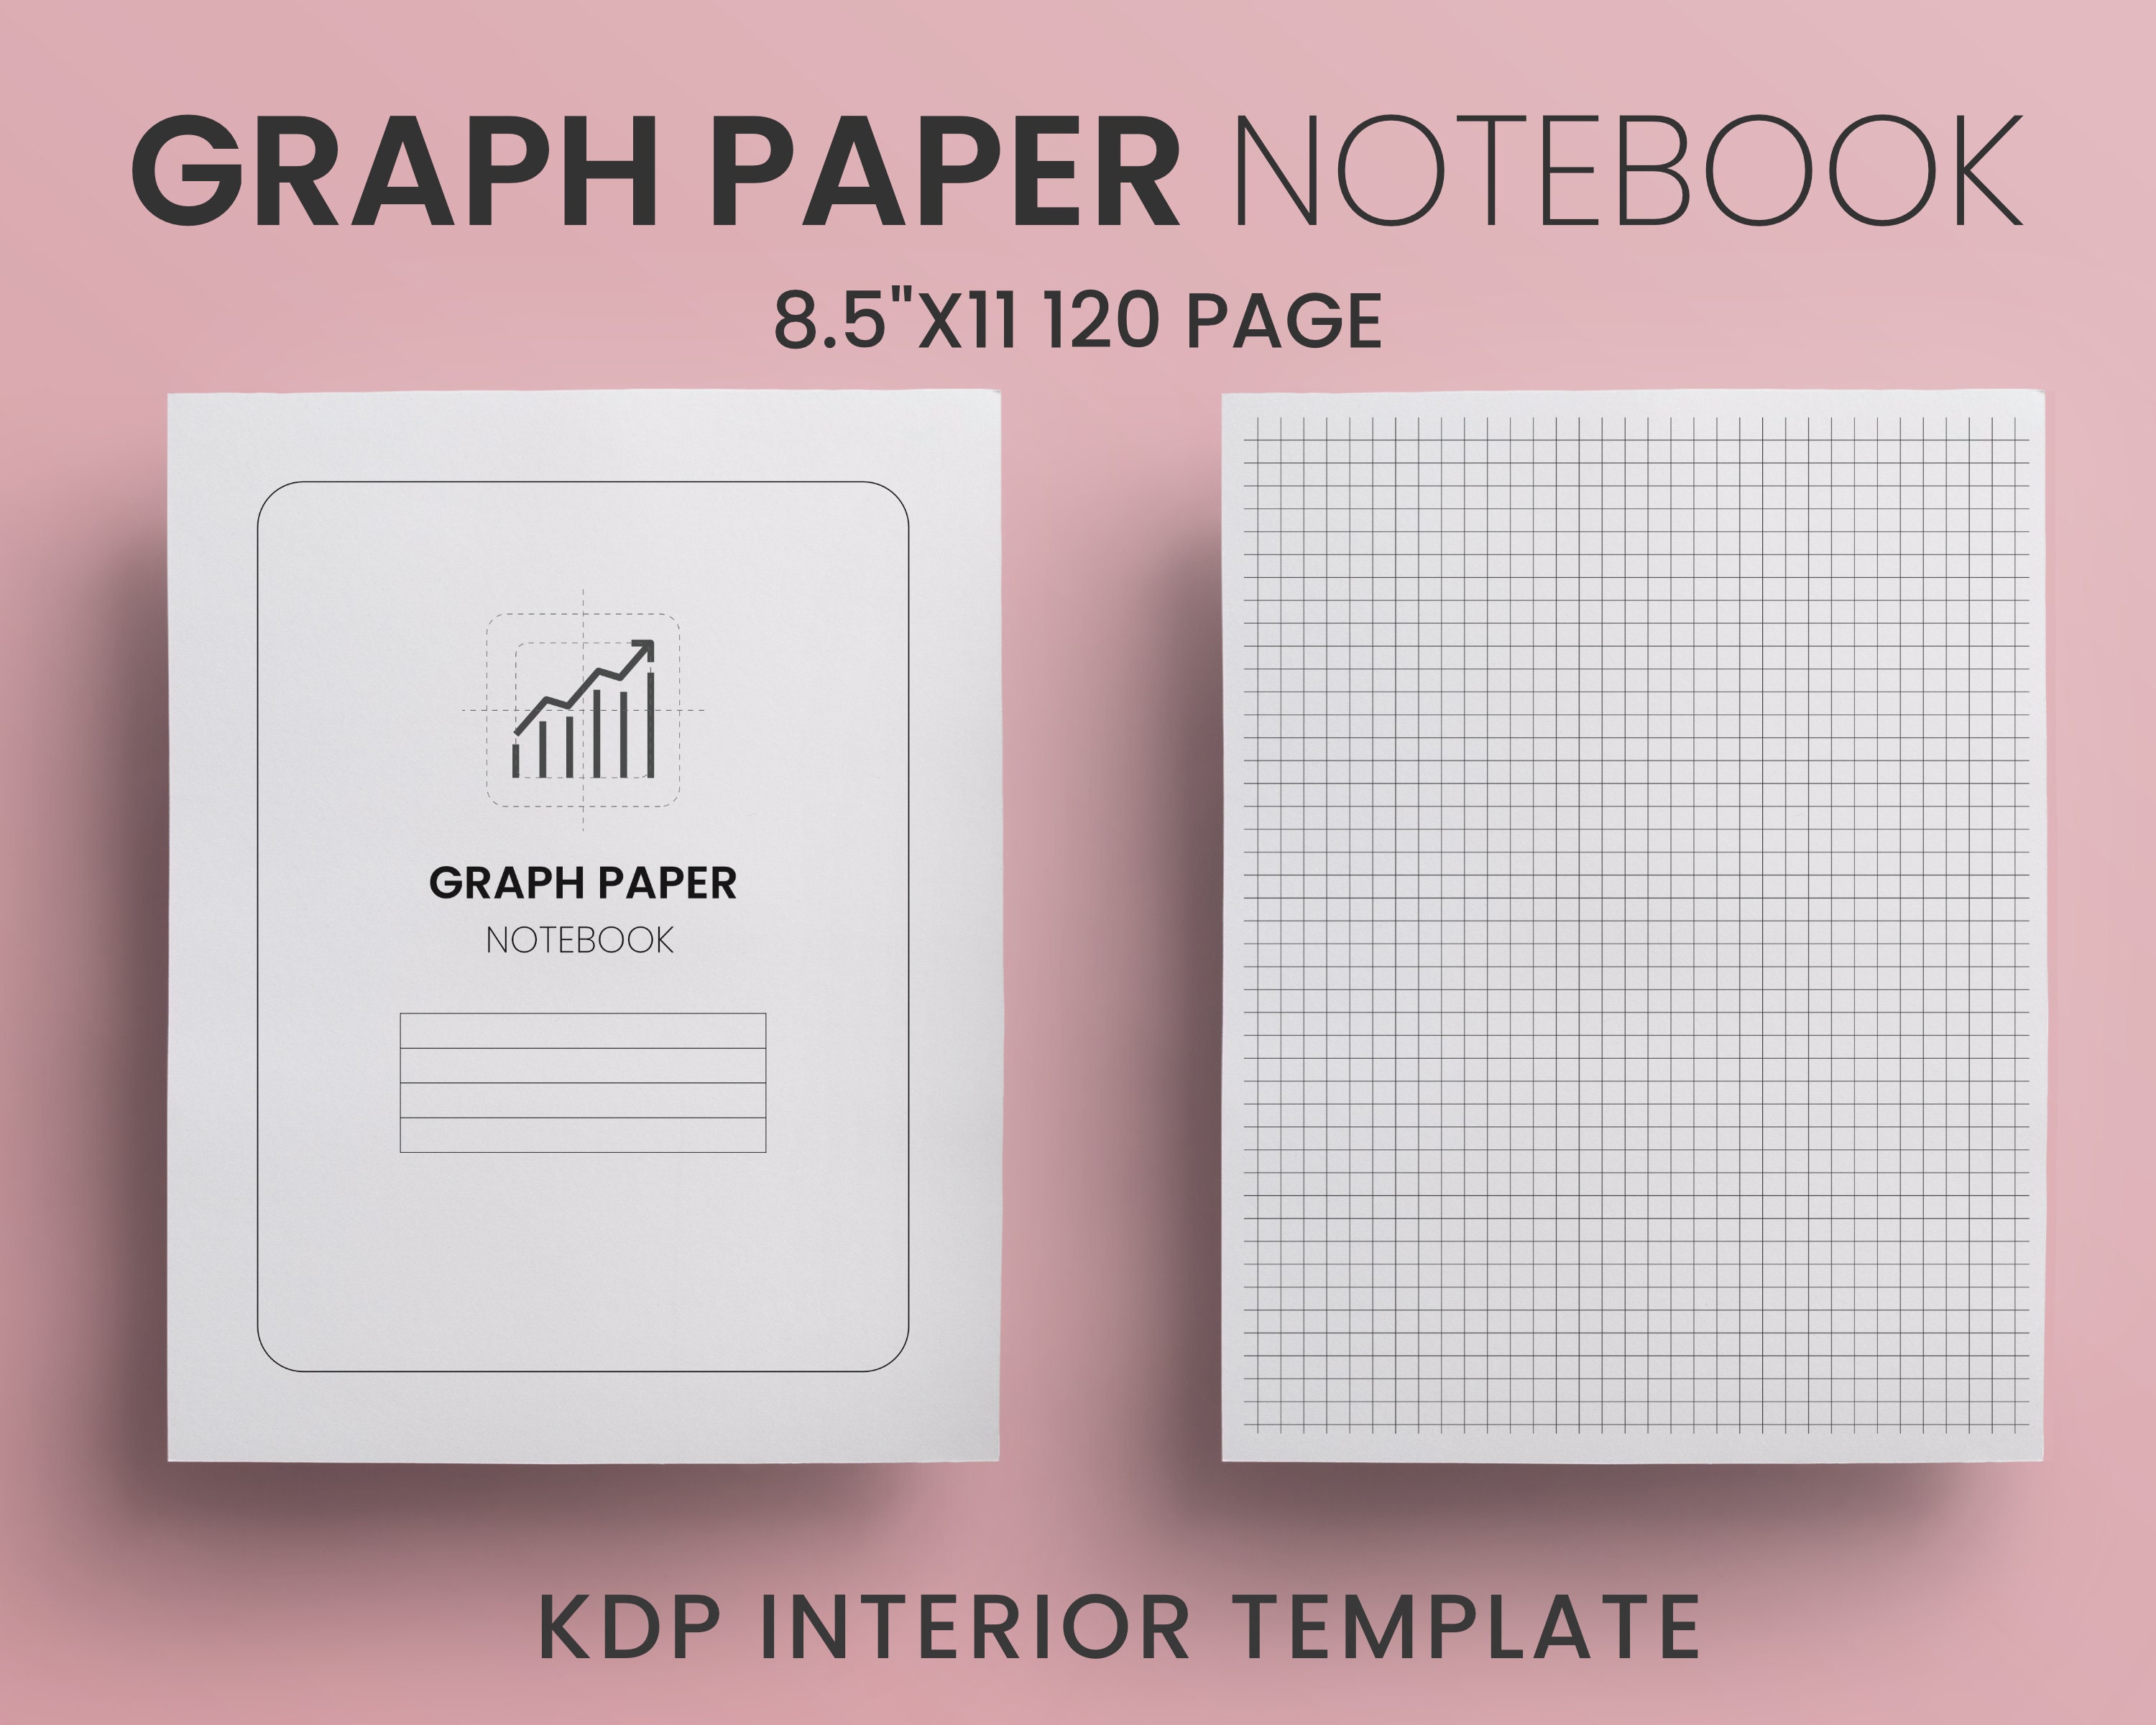 Graph Paper Notebook: Large Simple Graph Paper Journal - 120 Quad Ruled 4x4 Pages 8. 5 X 11 Inches - Grid Paper Notebook for Math and Science Students